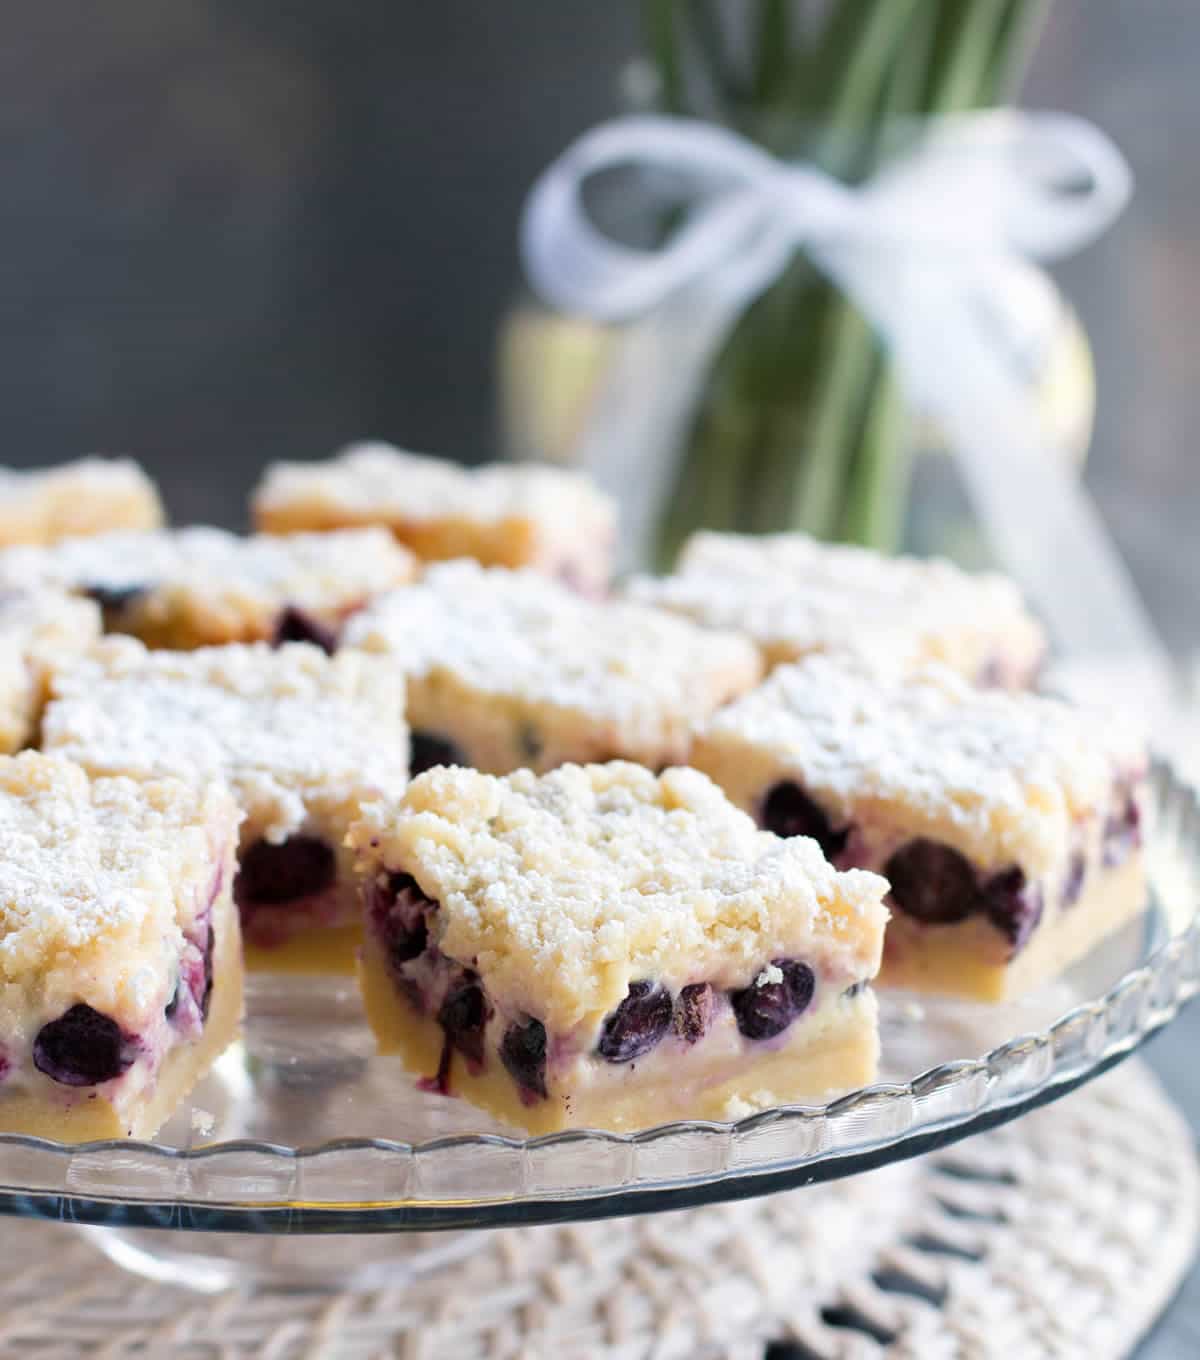 Lemon Blueberry Shortbread Bars. A thick, soft shortbread crust is topped with a lemony custard, fresh blueberries and a lemon crumb topping!